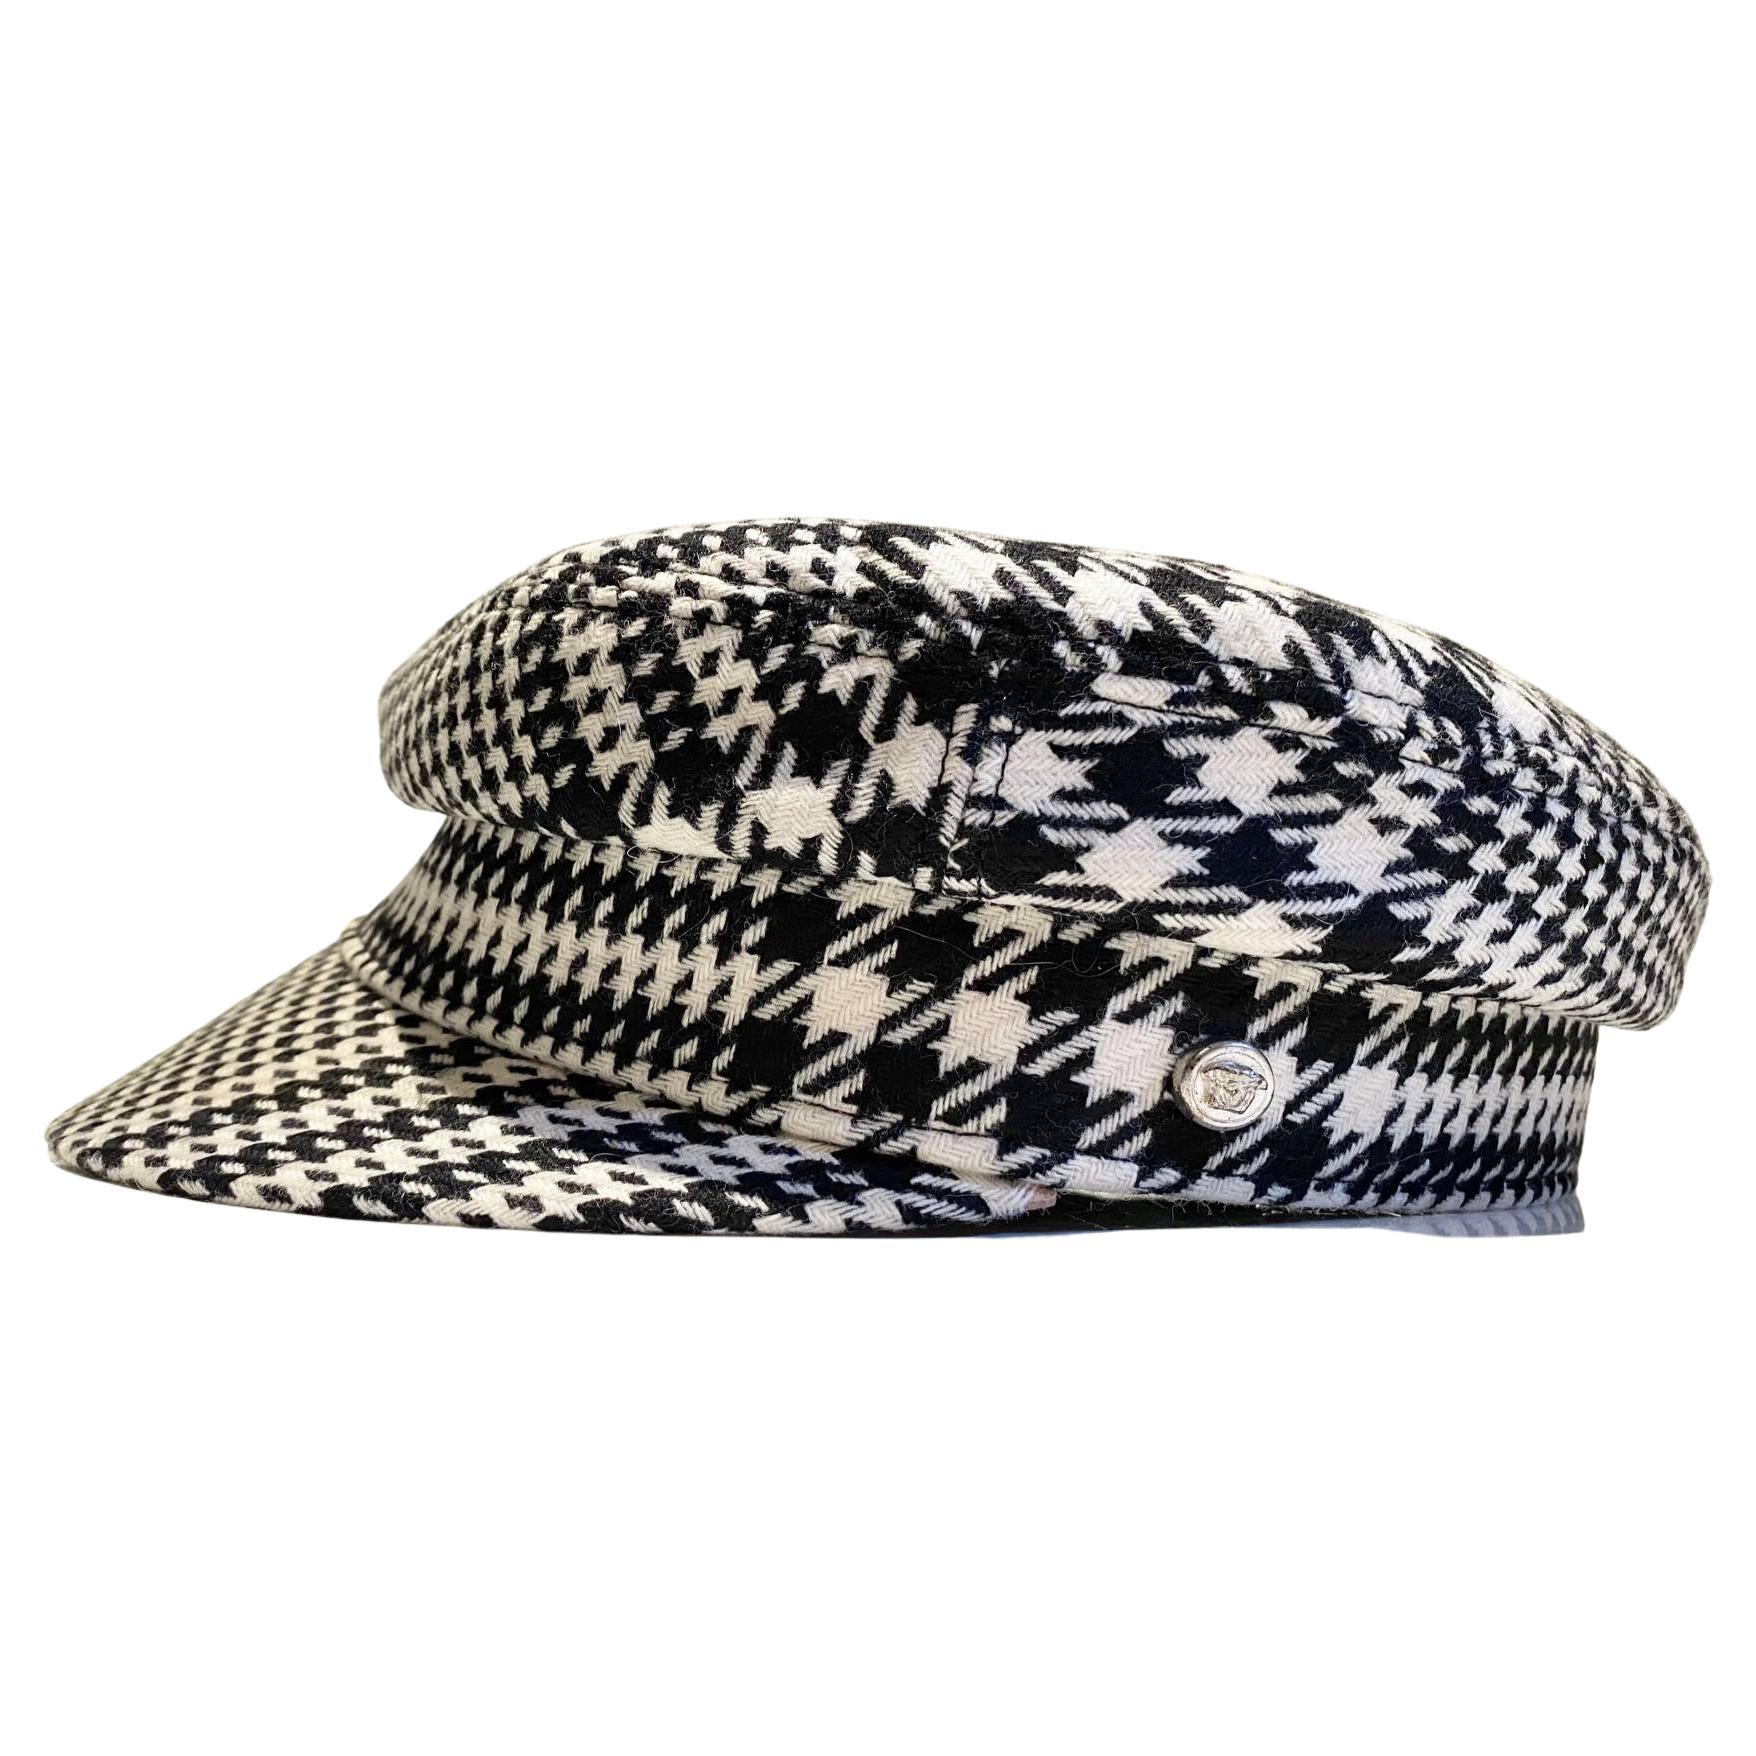 1990s Gianni Versace Black and White Houndstooth Flat Cap For Sale